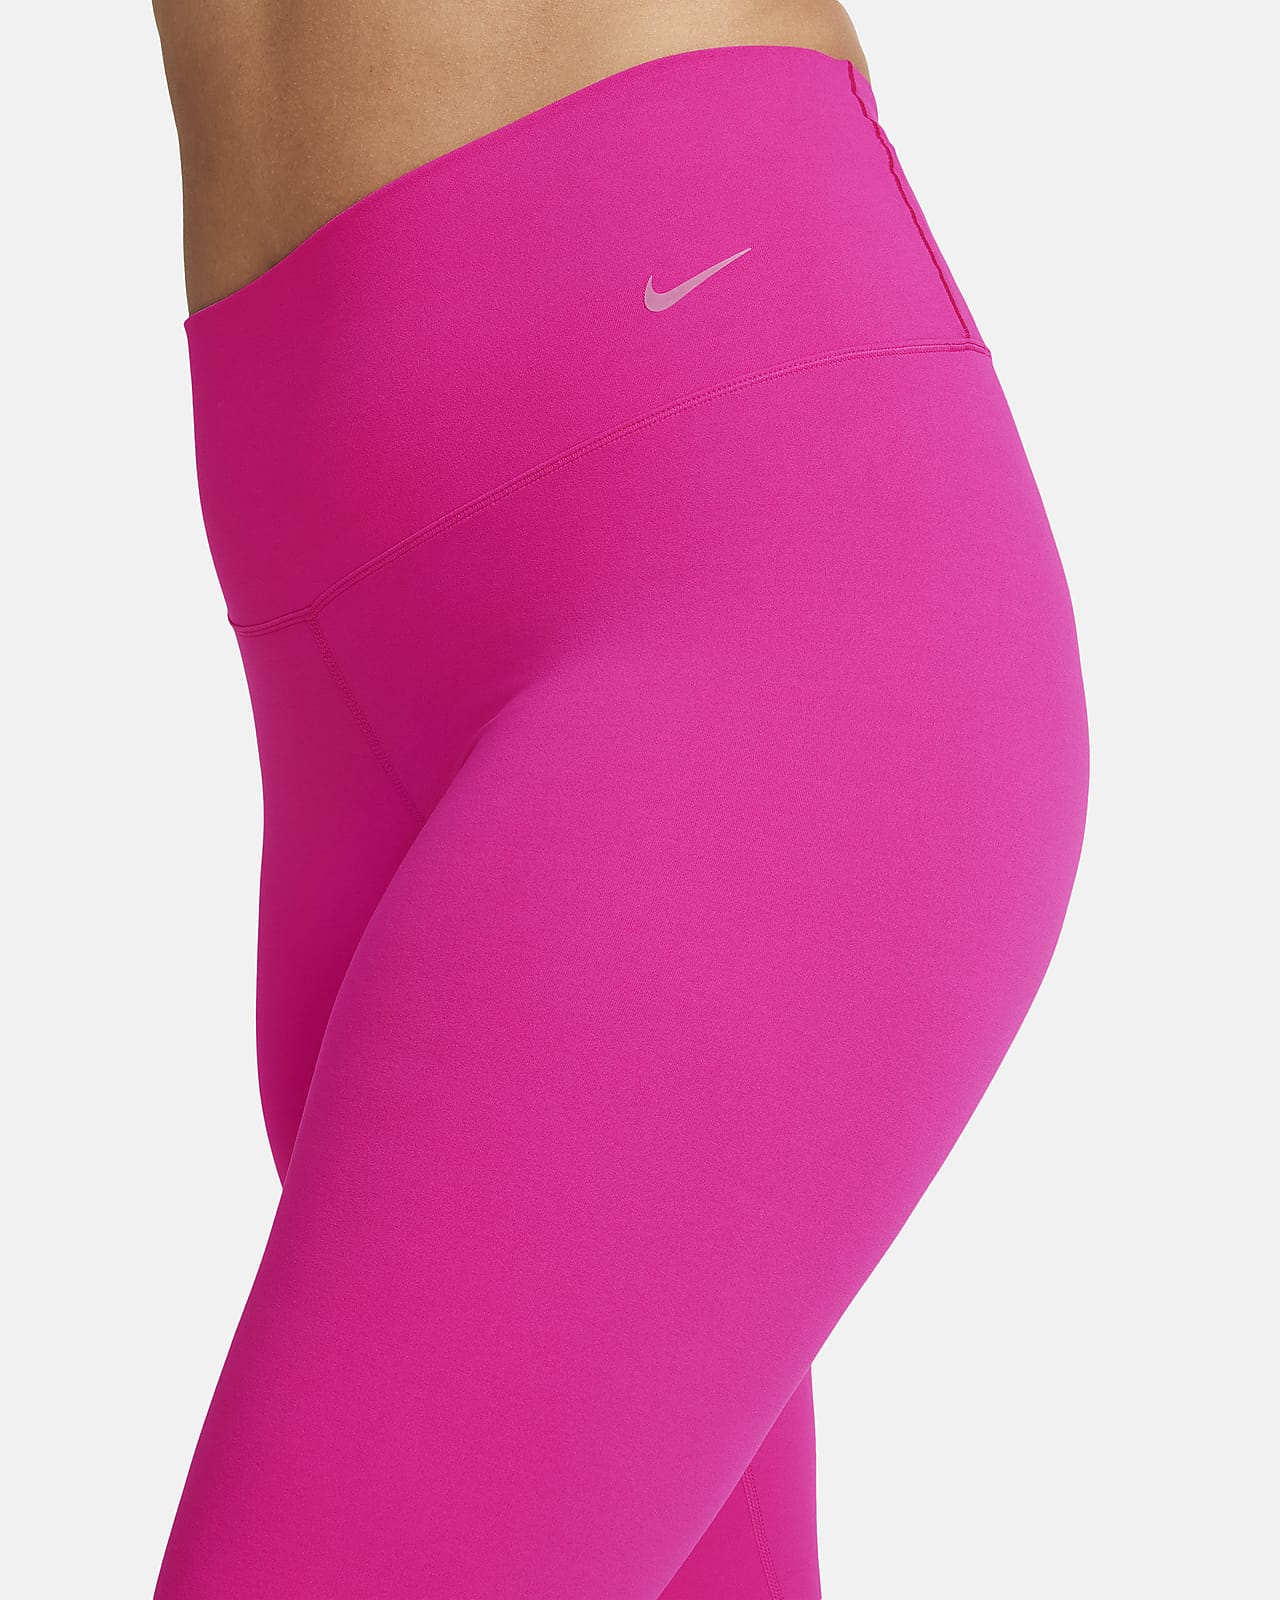  Nike Zenvy Women's Gentle-Support High-Waisted Cropped